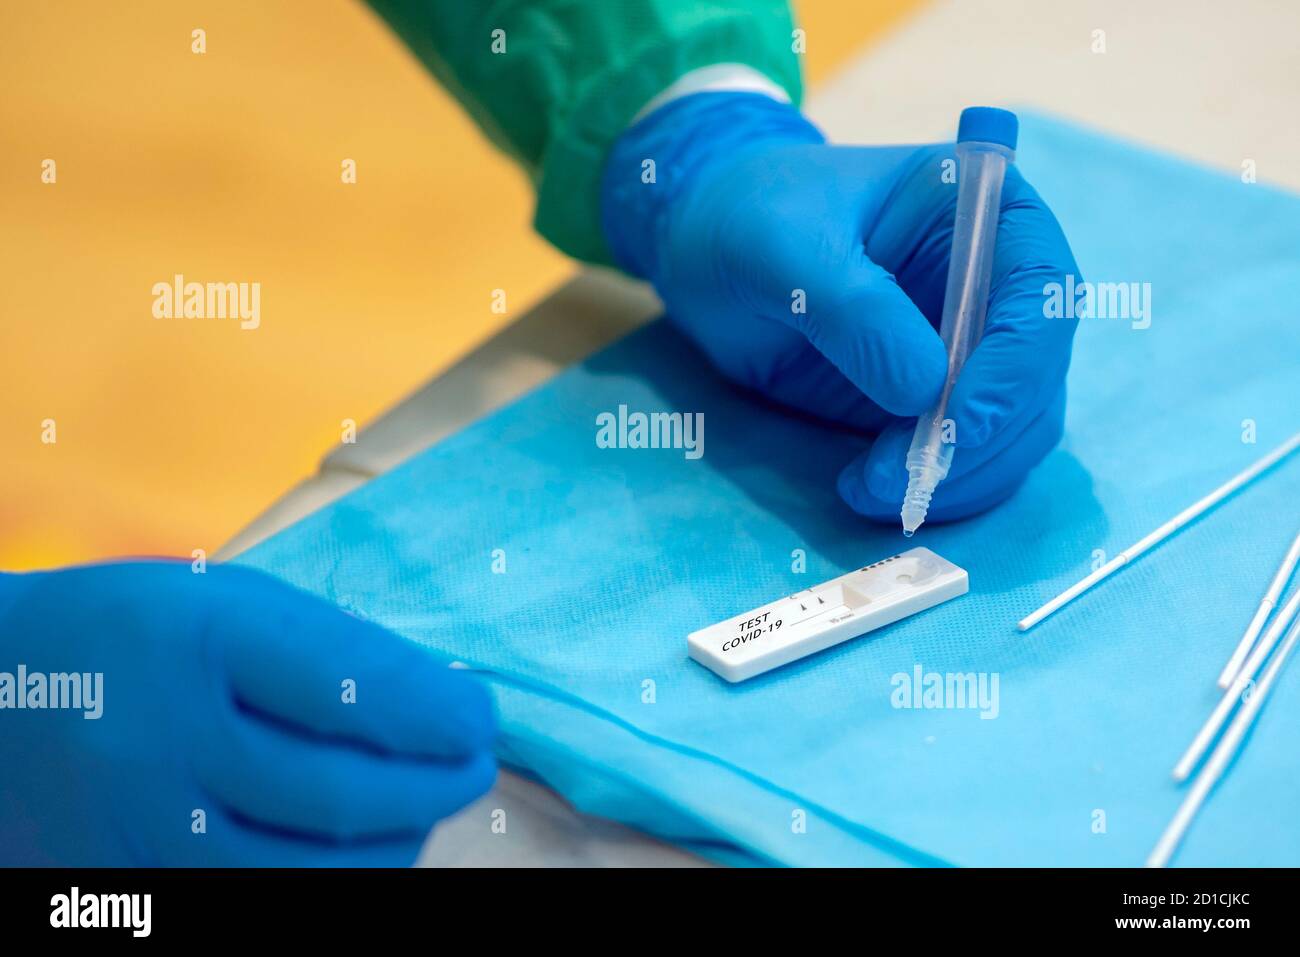 Hands of health personnel testing for viruses Stock Photo